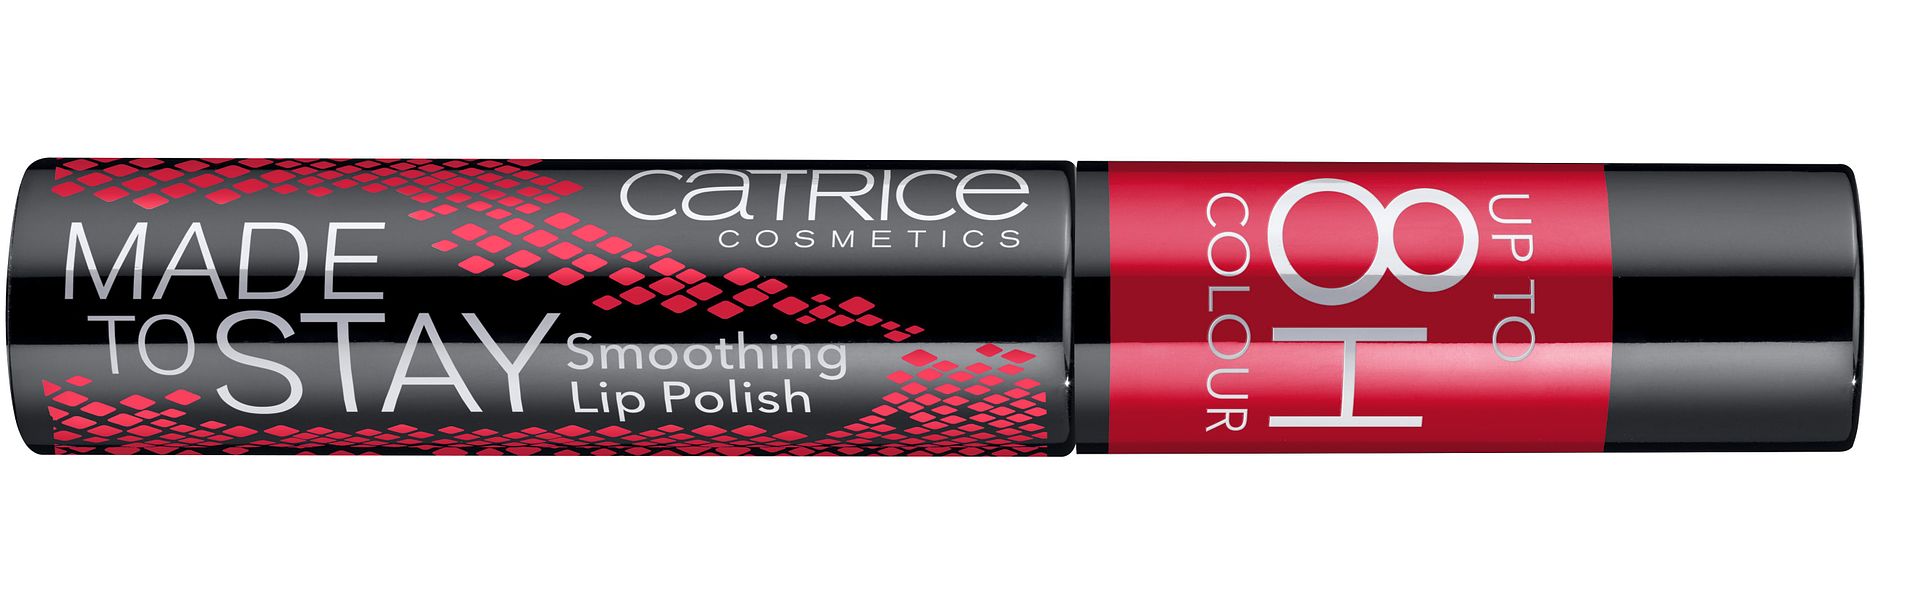 Catrice Made to Stay Smoothing Lip Polish